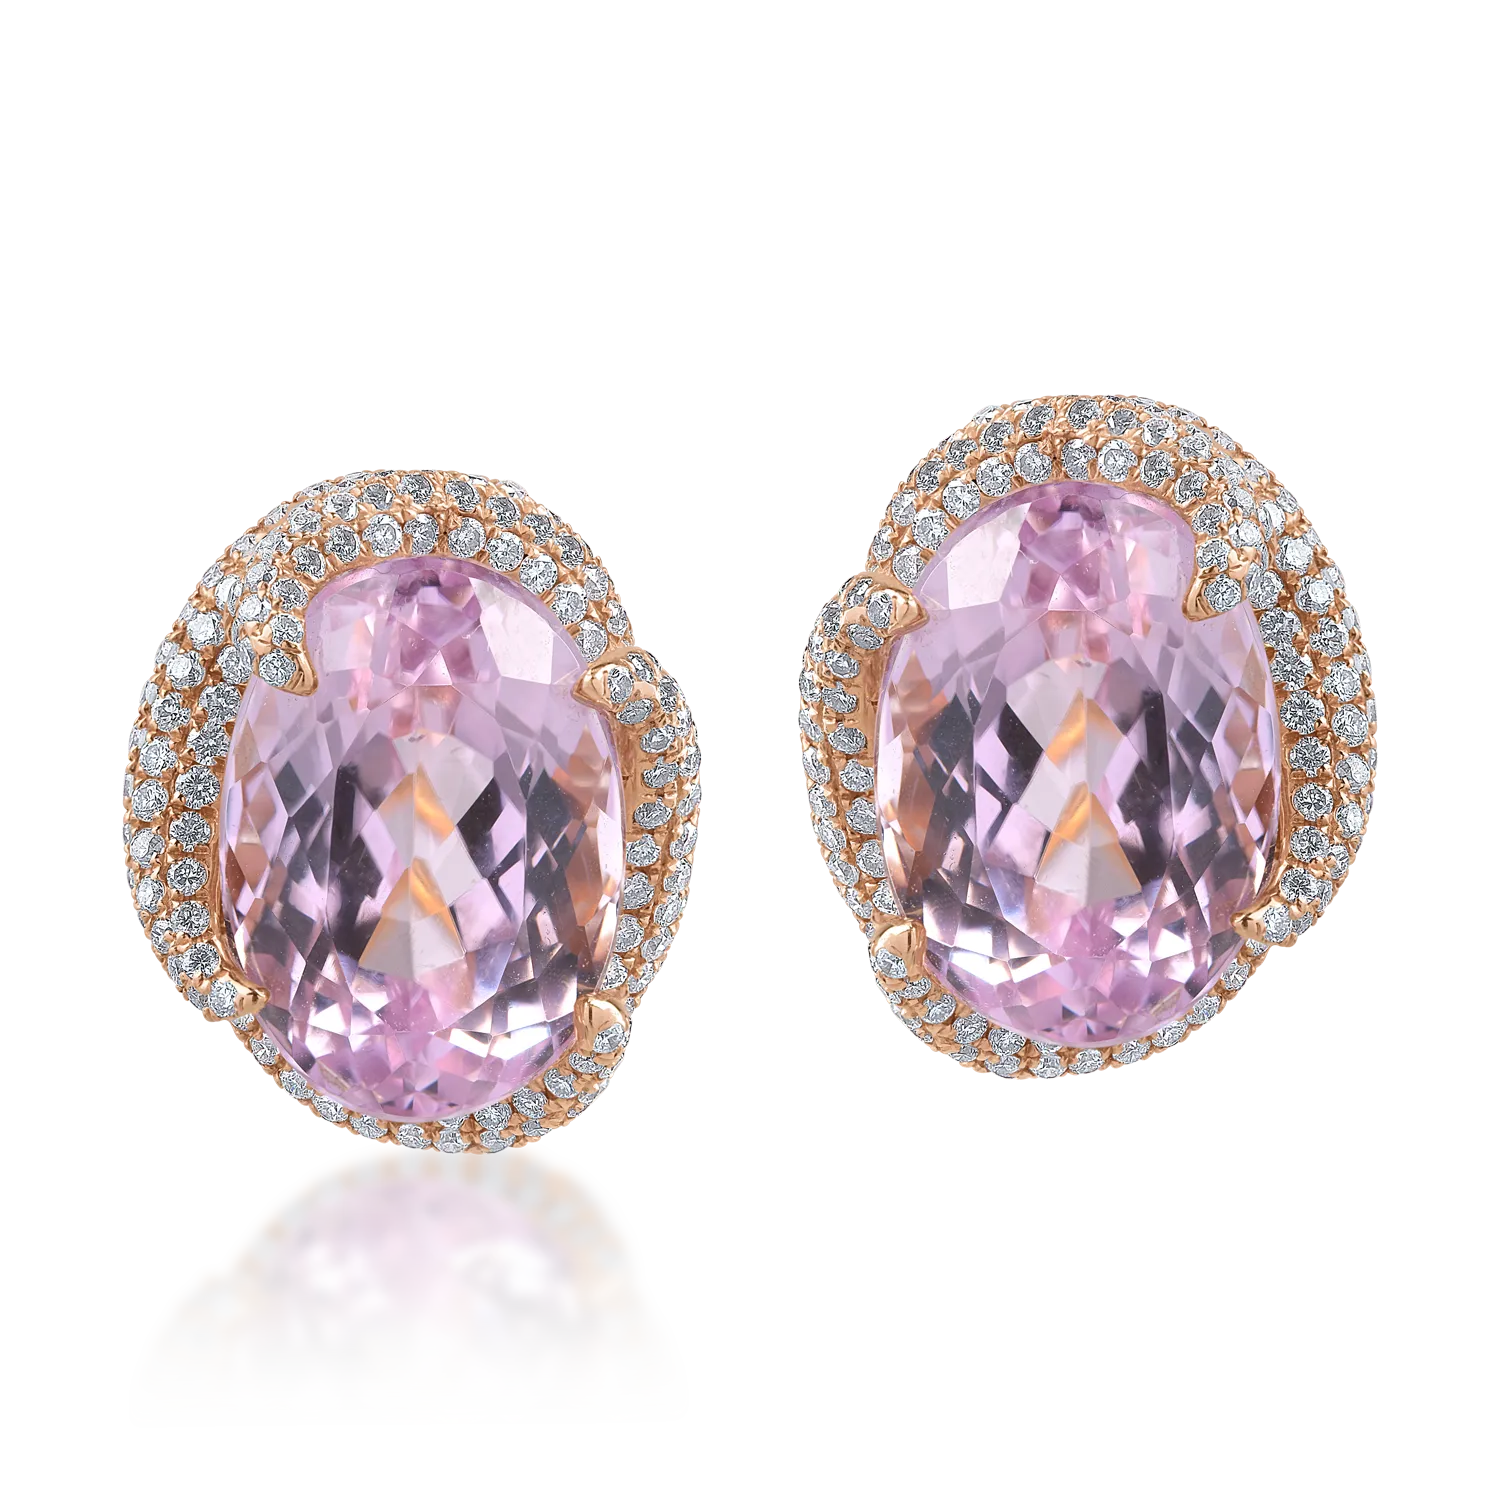 Rose gold earrings with 16.24ct kunzites and 1.75ct diamonds